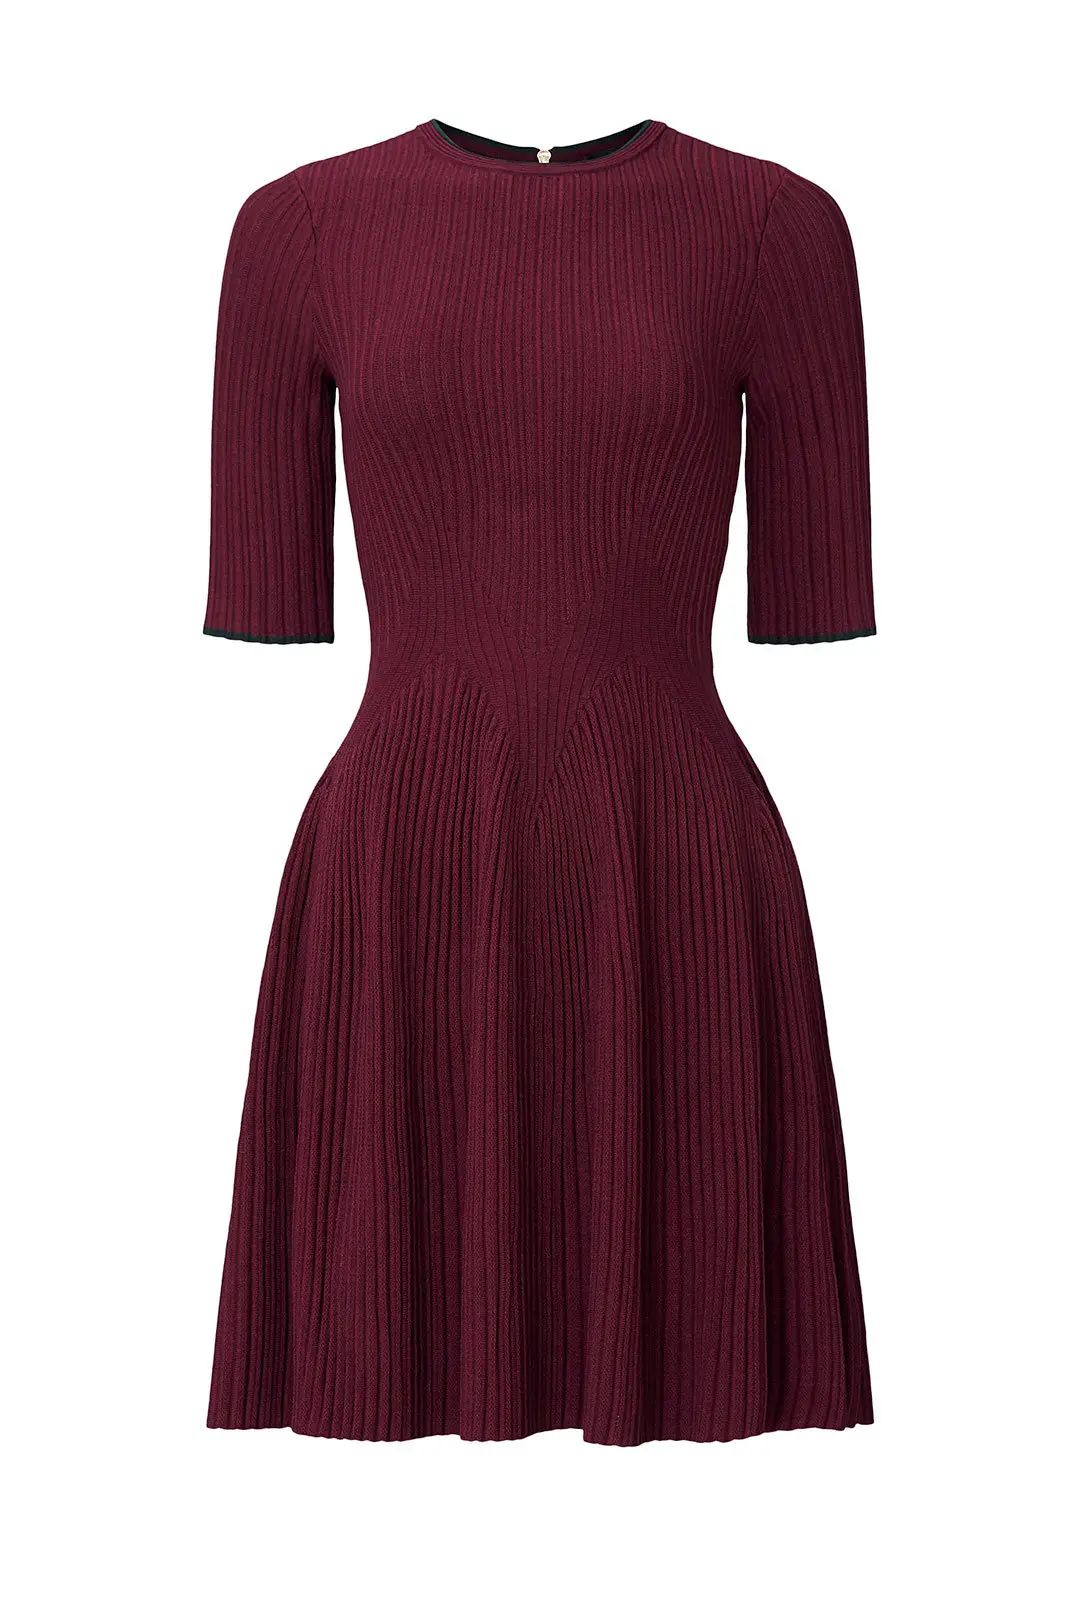 Ted Baker London Renyina Dress | Rent the Runway